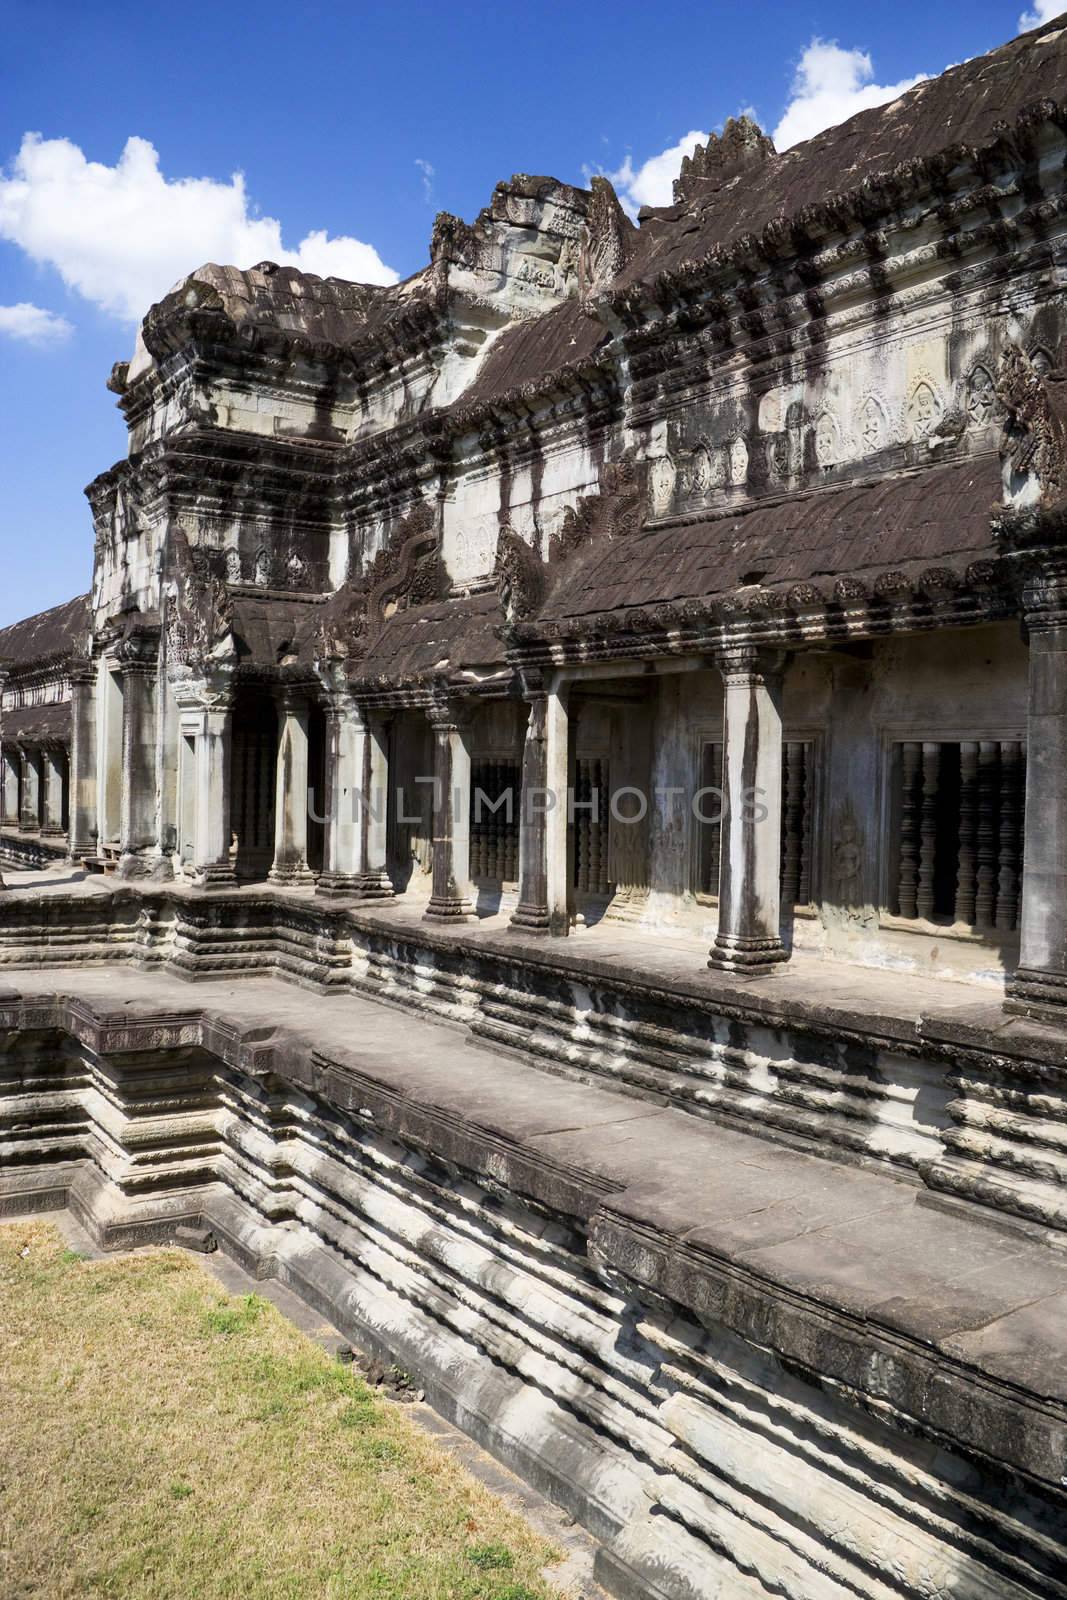 Image of UNESCO's World Heritage Site of Angkor Wat, located at Siem Reap, Cambodia.